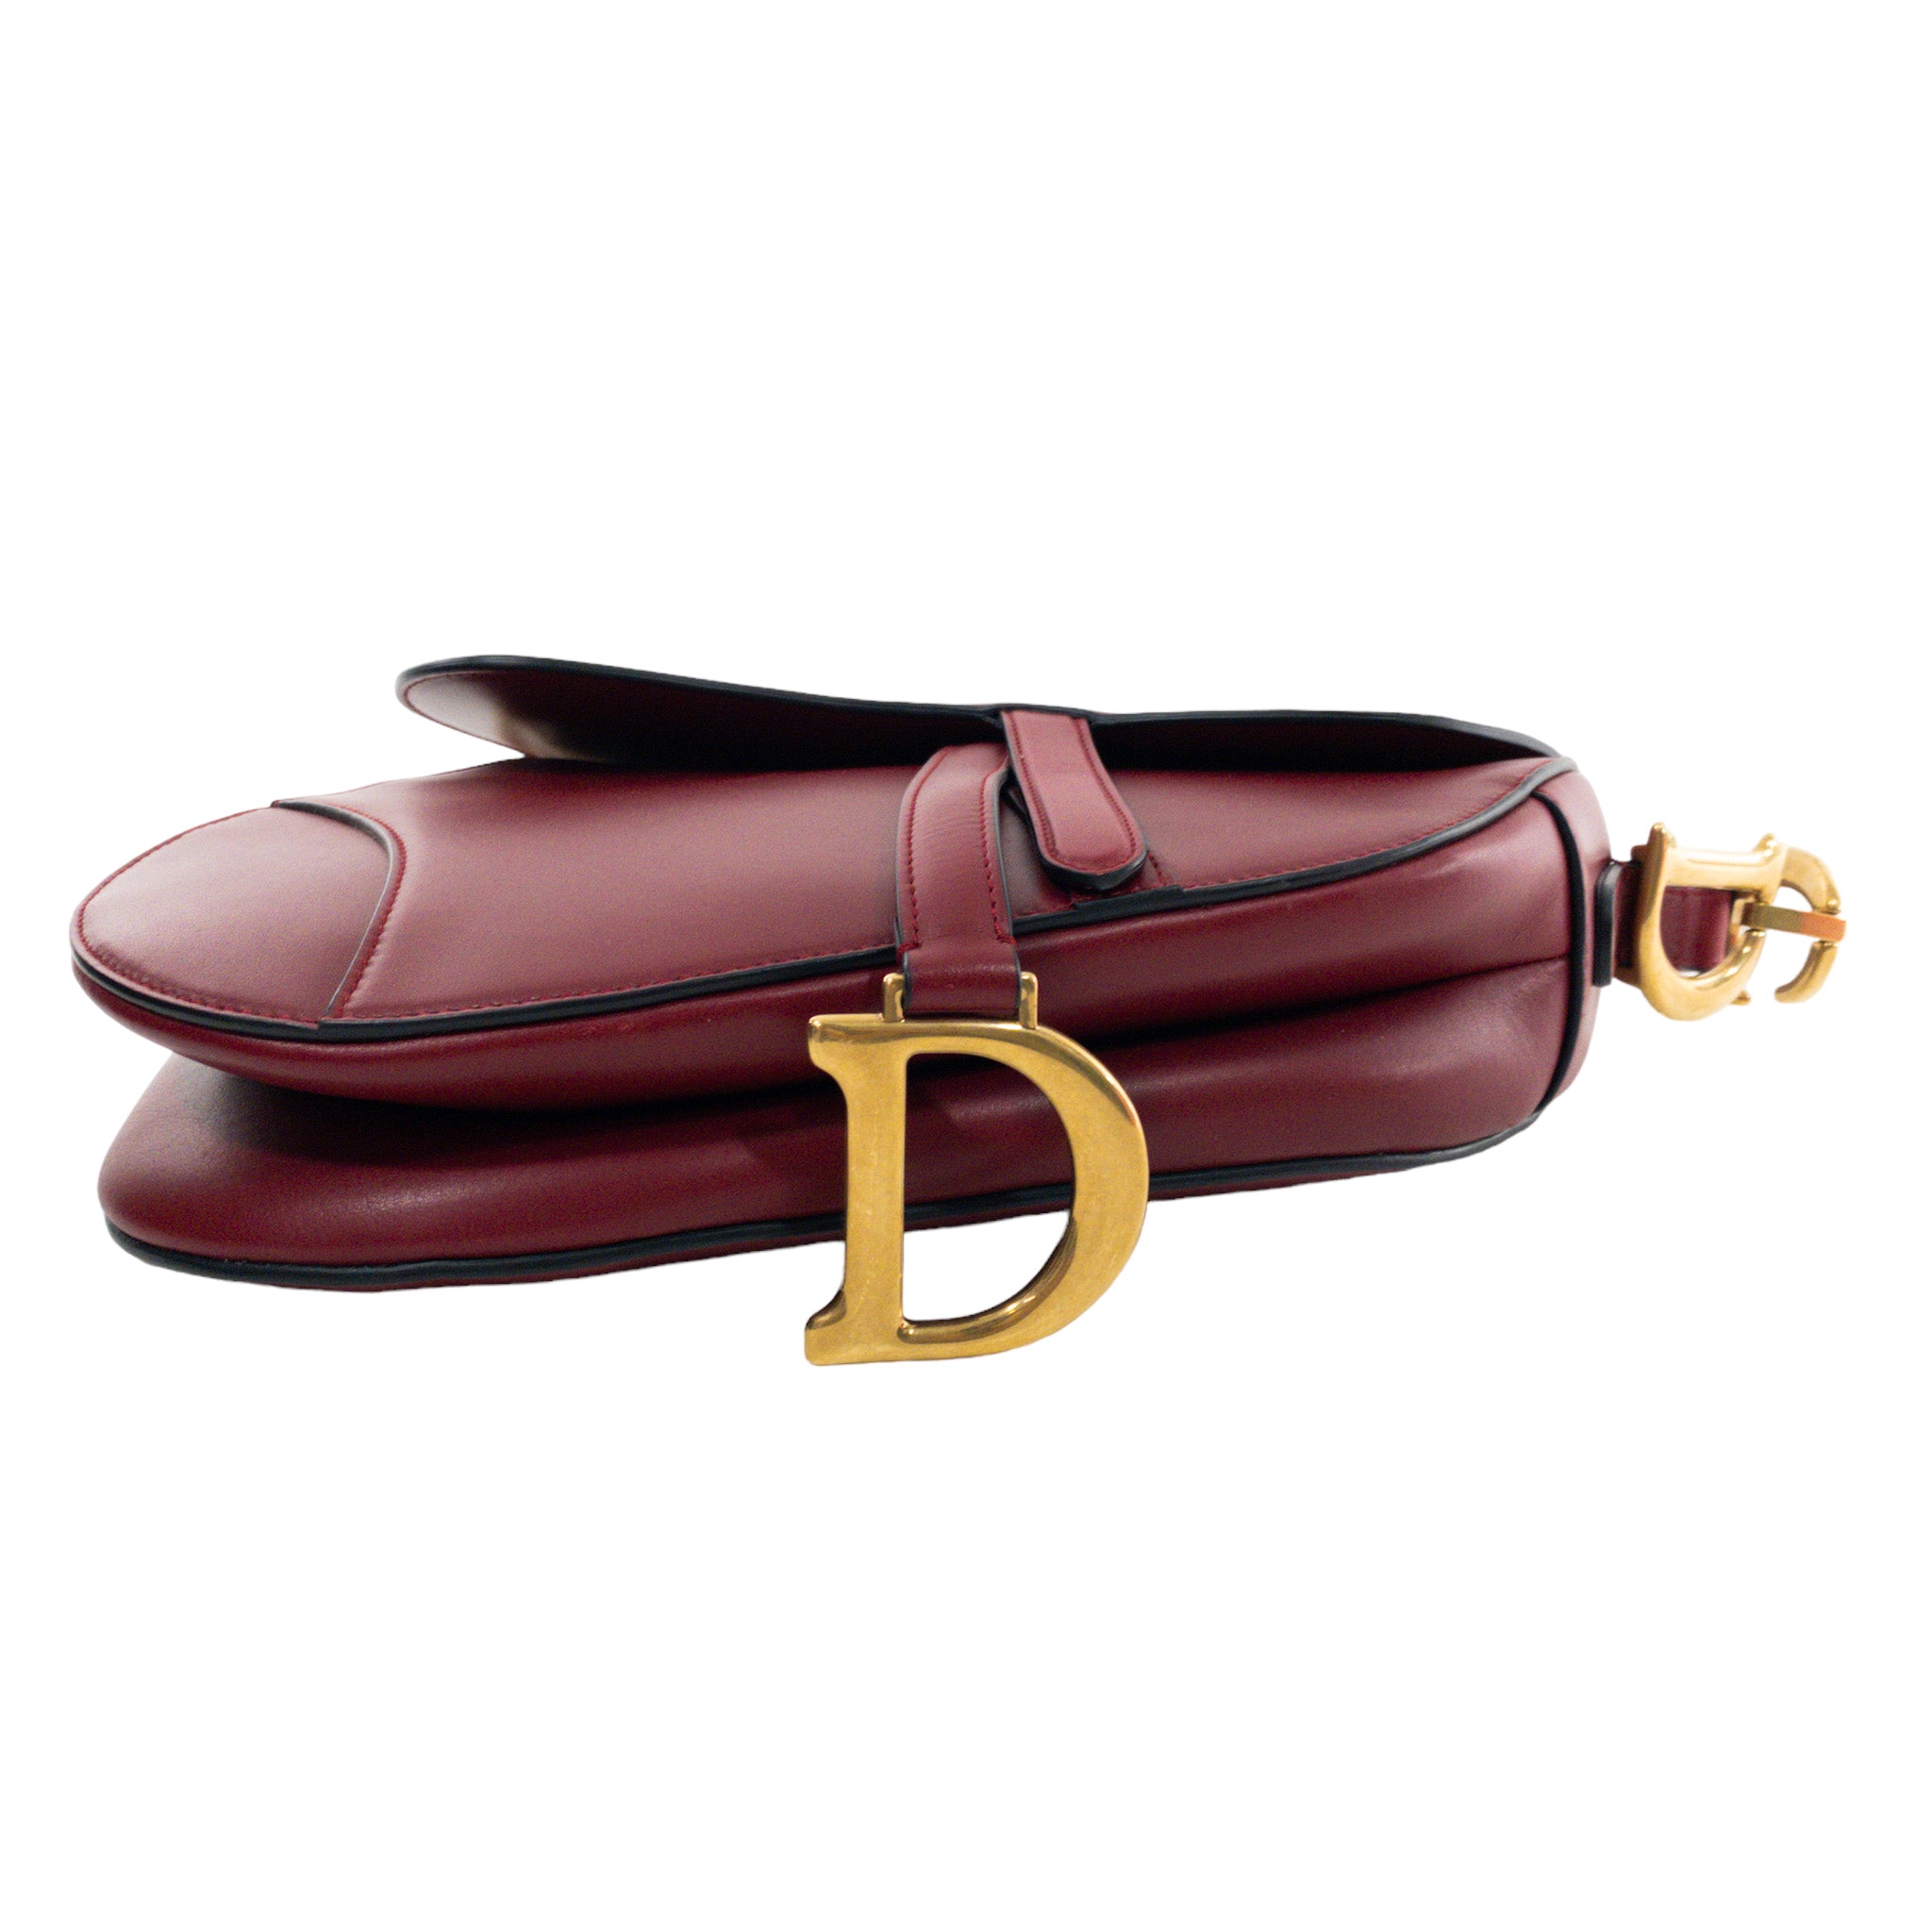 Dior Saddle Bags & Handbags for Women, Authenticity Guaranteed